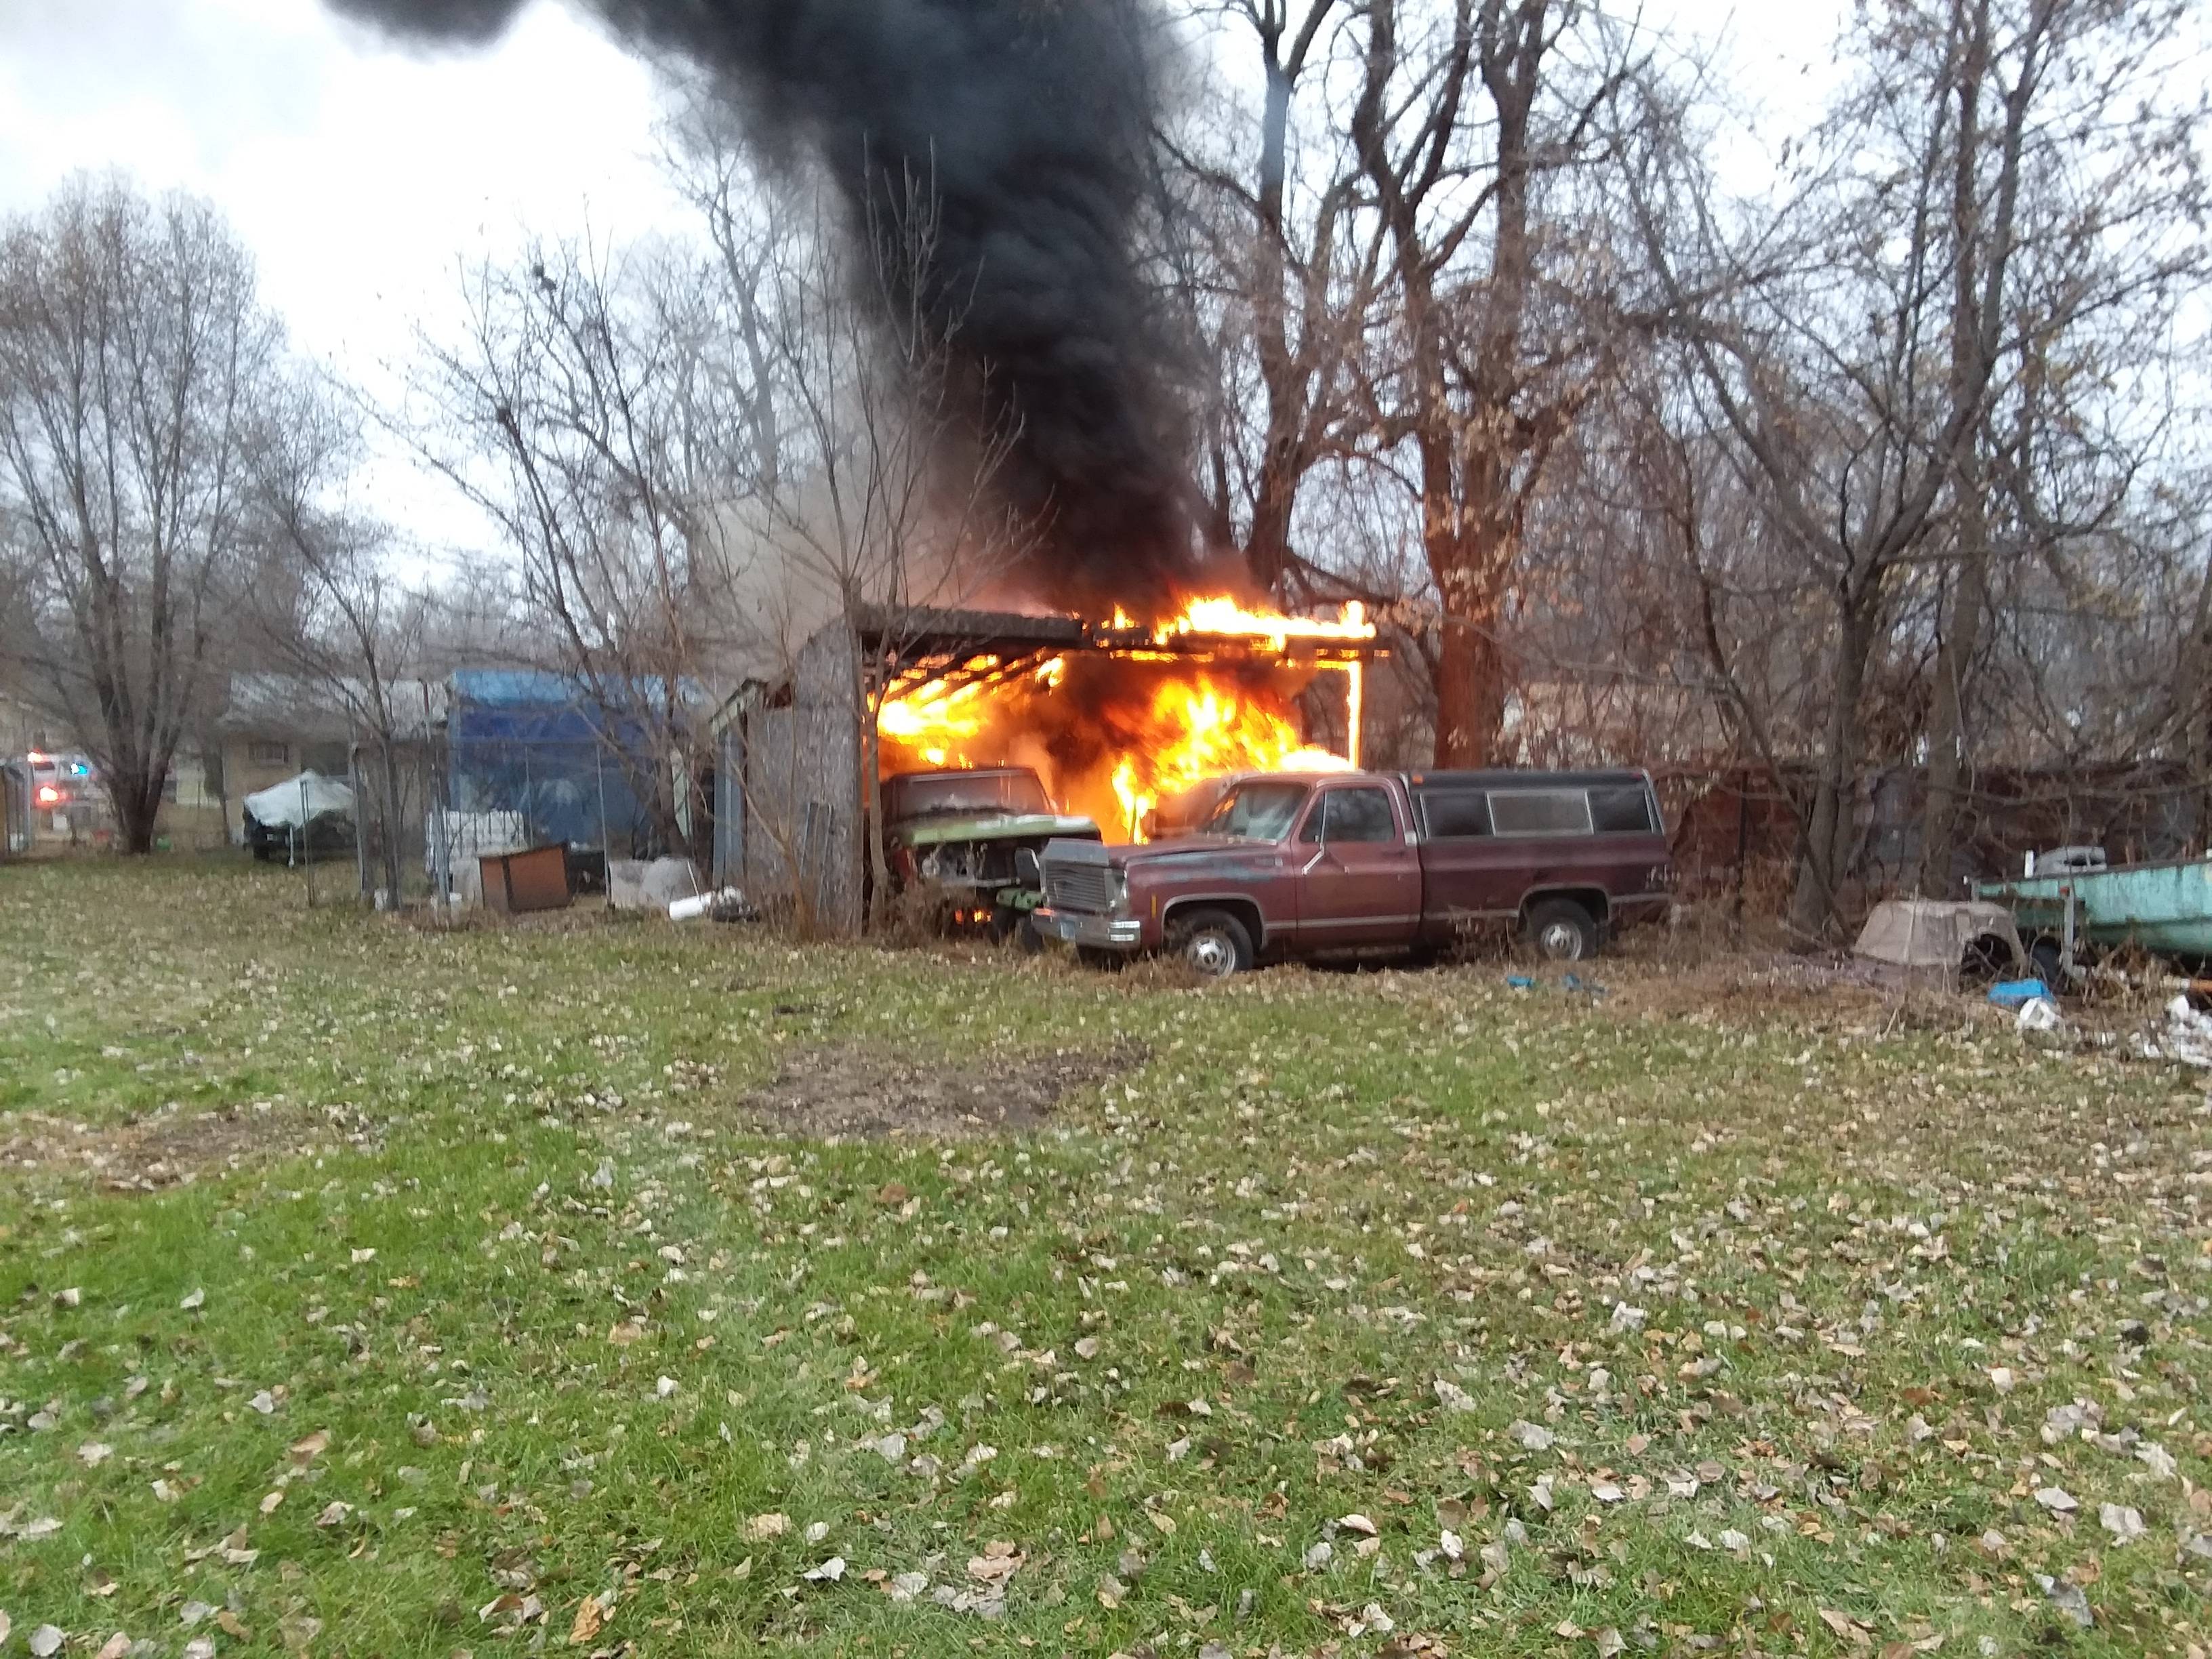 Car & Shed Fire, 11-23-18